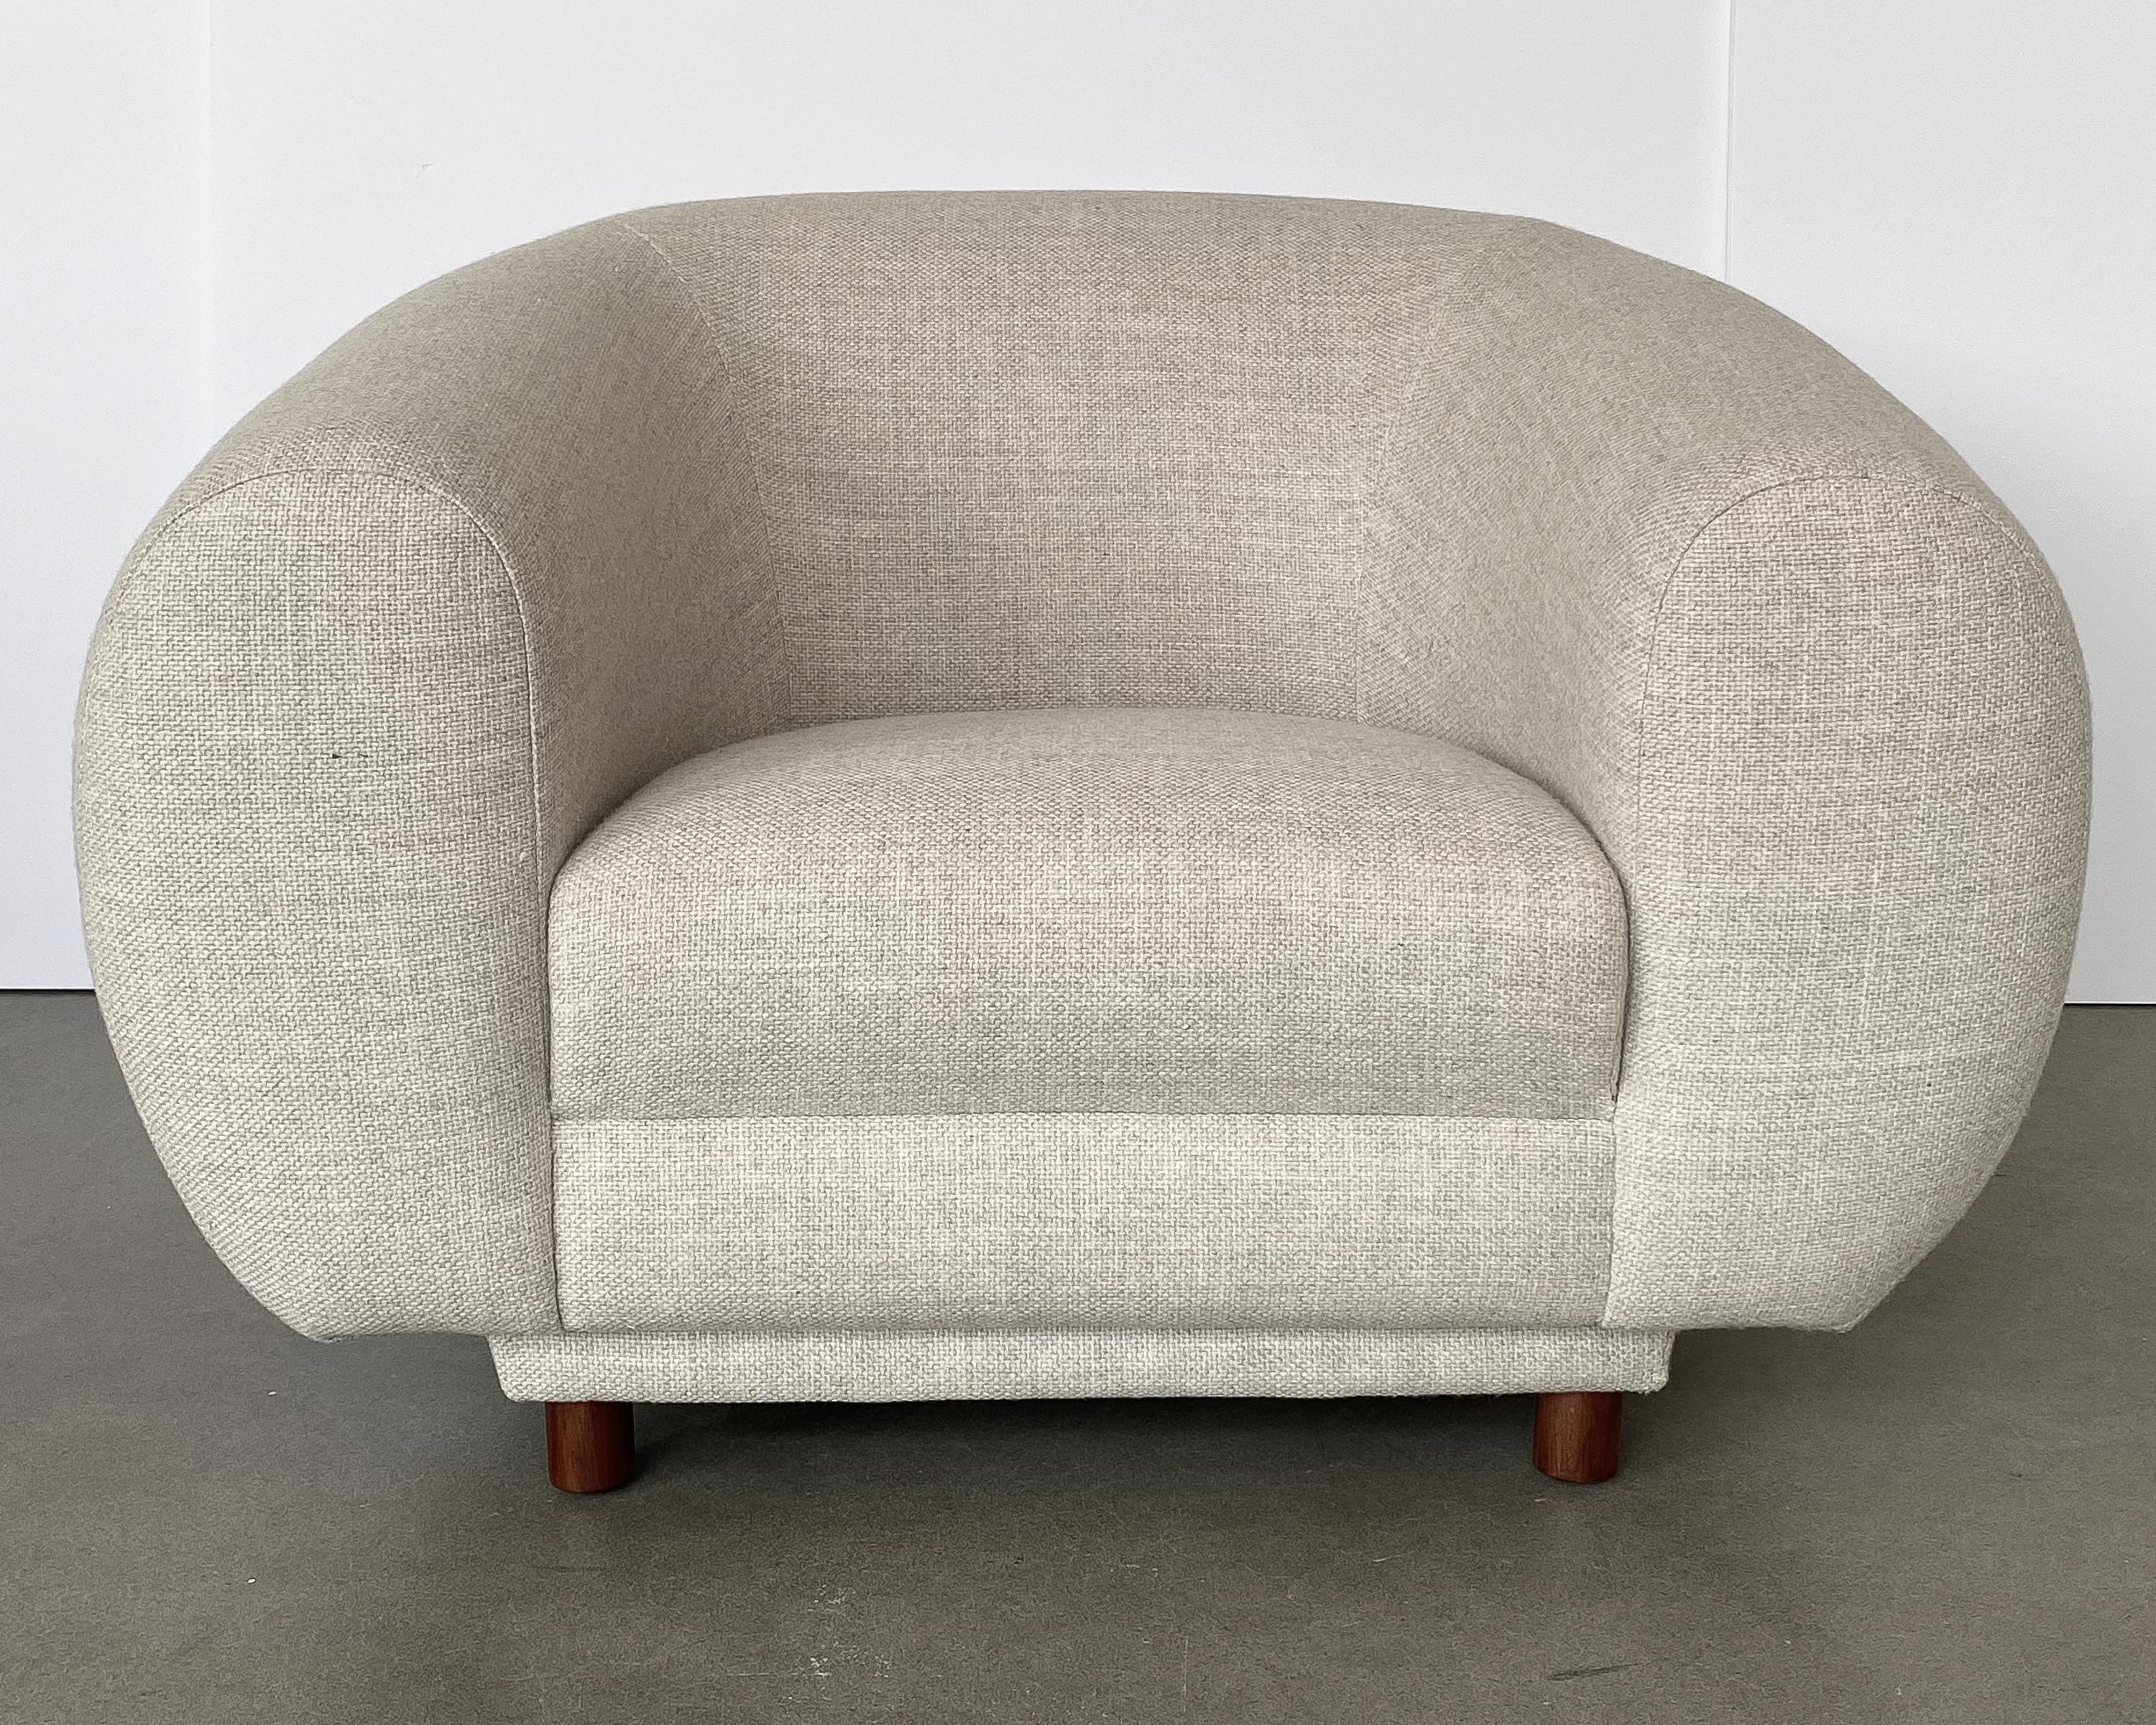 An overstuffed Mid-Century Modern polar bear inspired lounge chair.  Newly upholstered in a very soft basket-weave fabric with natural striations. The fabric is a warm light stone color. A fabric swatch is available upon request. All new foam